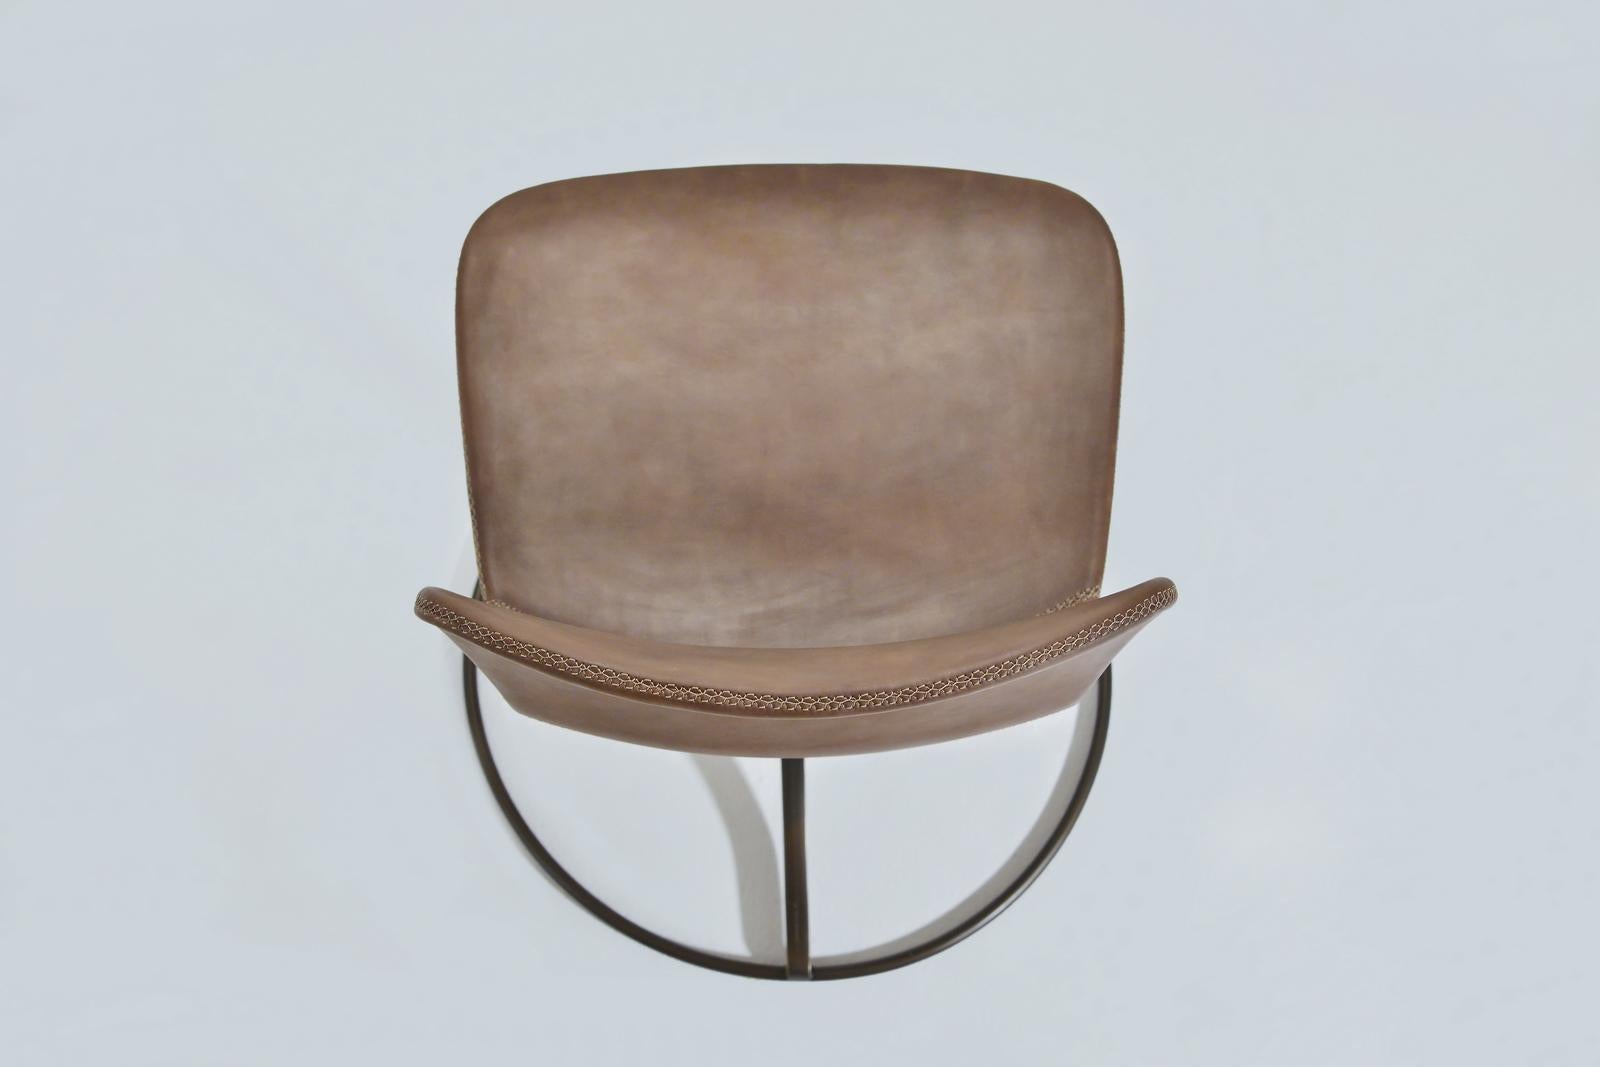 Bespoke Brass Swivel Chair with Floor-Ring, in Truffe Leather, by P. Tendercool In New Condition For Sale In Bangkok, TH